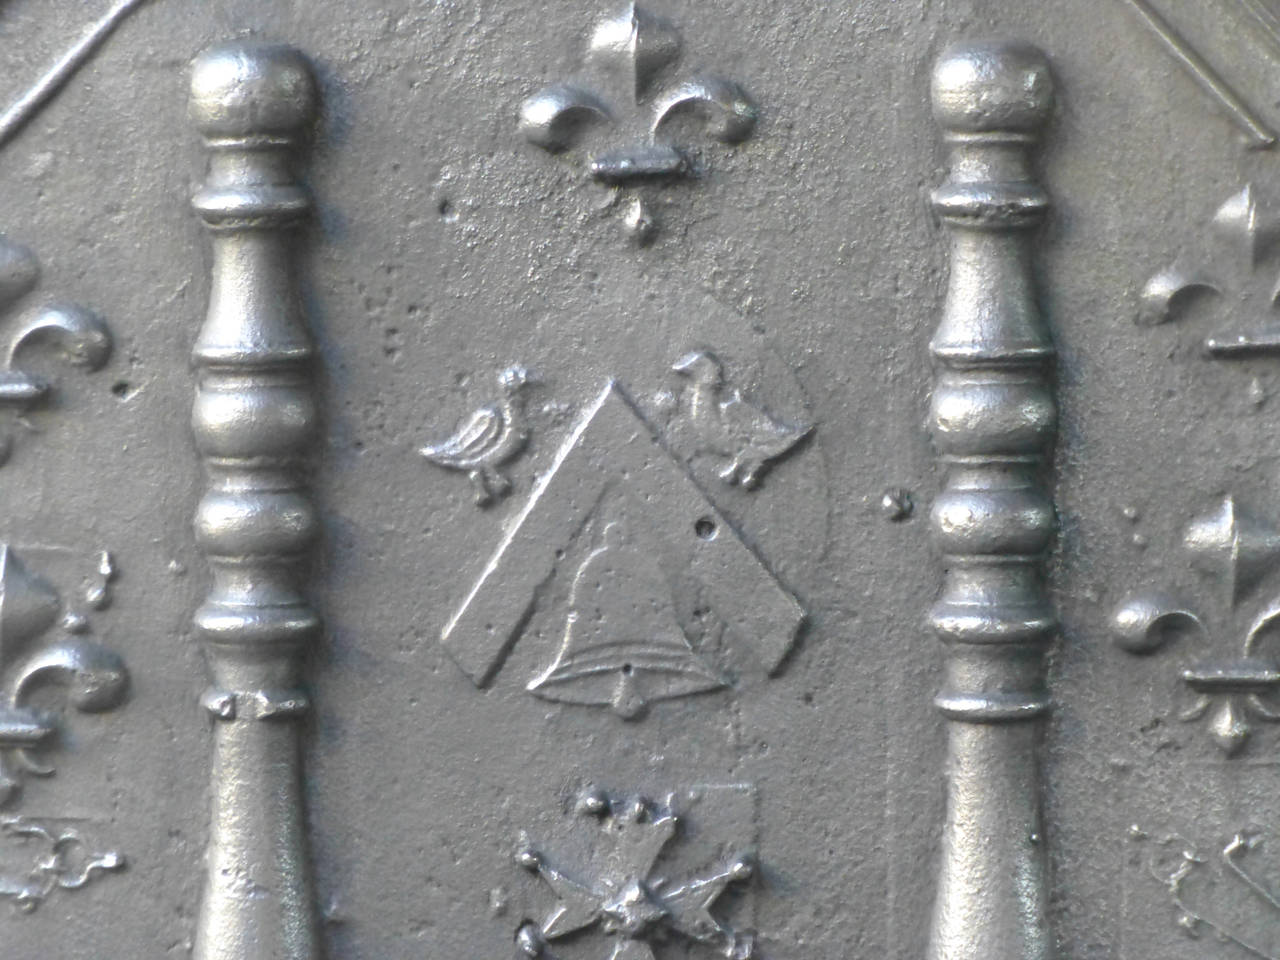 With unknown arms, pillars of Hercules, fleurs de lys (symbol of royalty), and other symbols such as pipes.